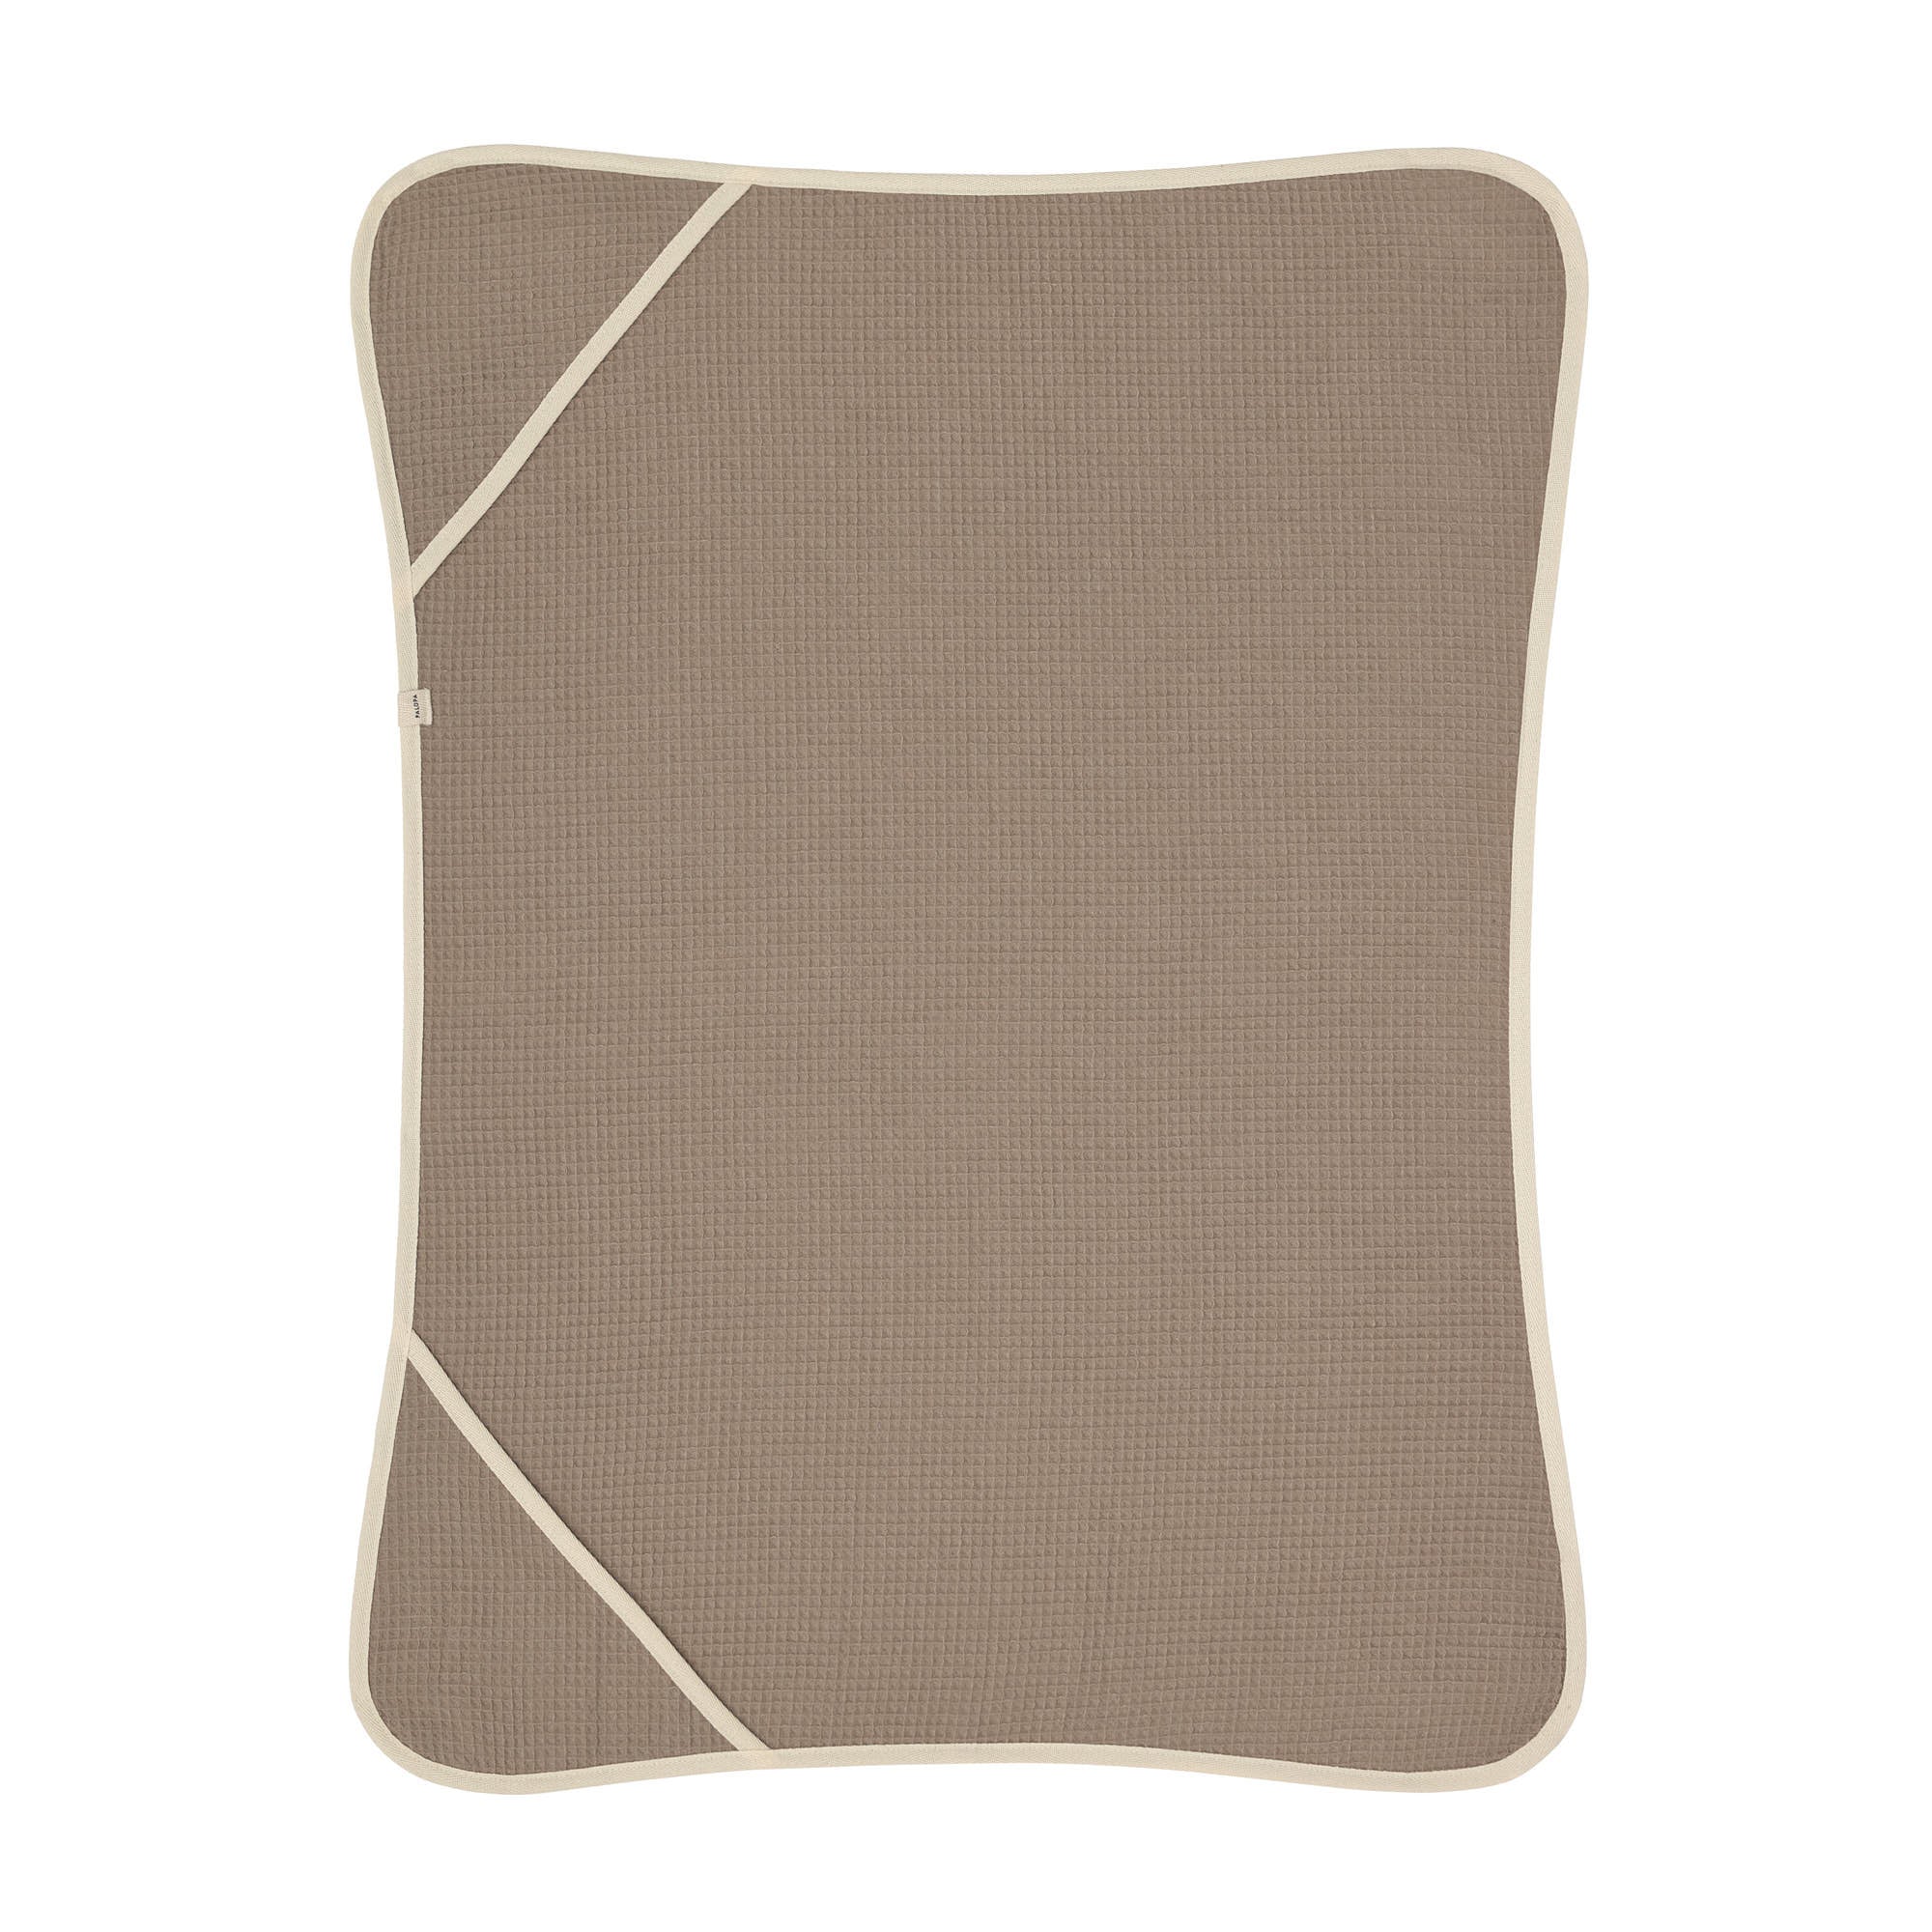 Dog Towel - Nobs, Taupe